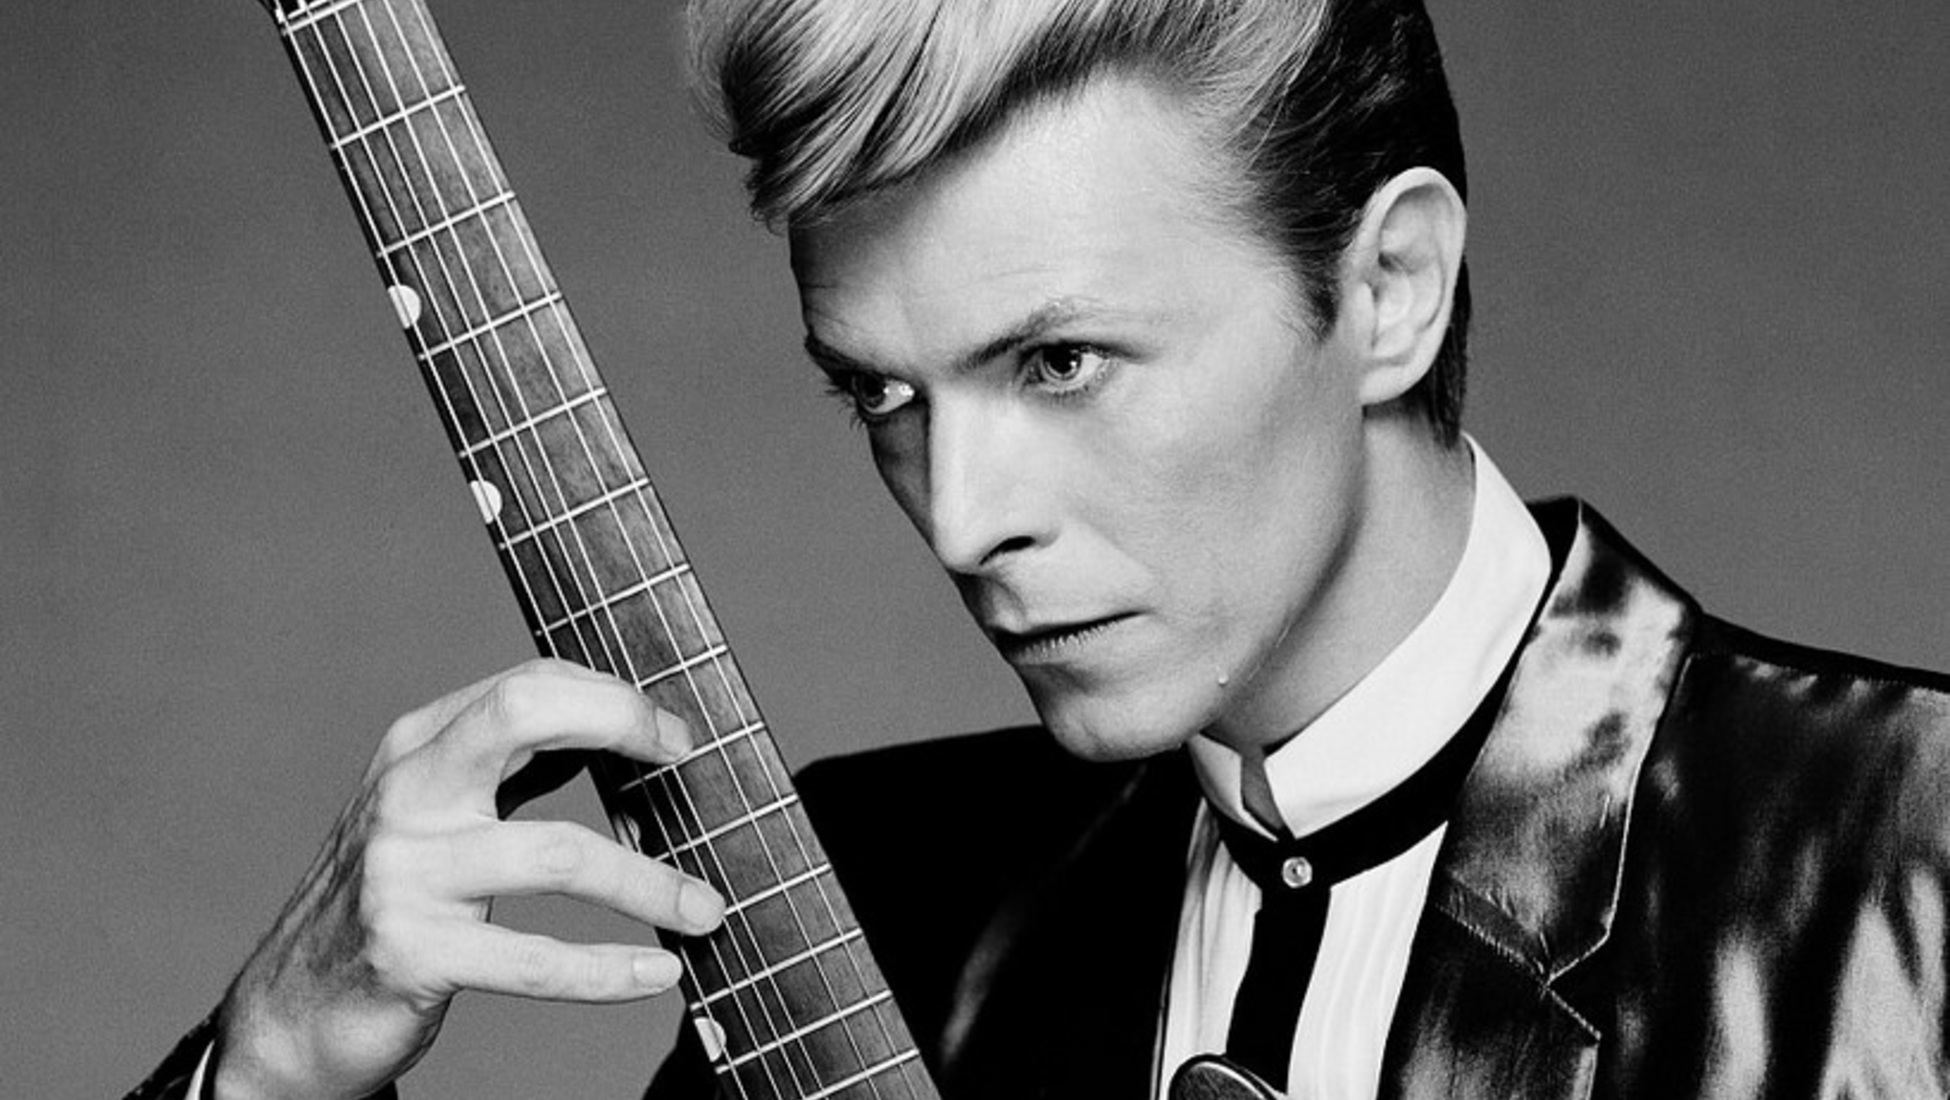 QUIZ: How Many of David Bowie's Studio Albums Can You Name? - Catawiki